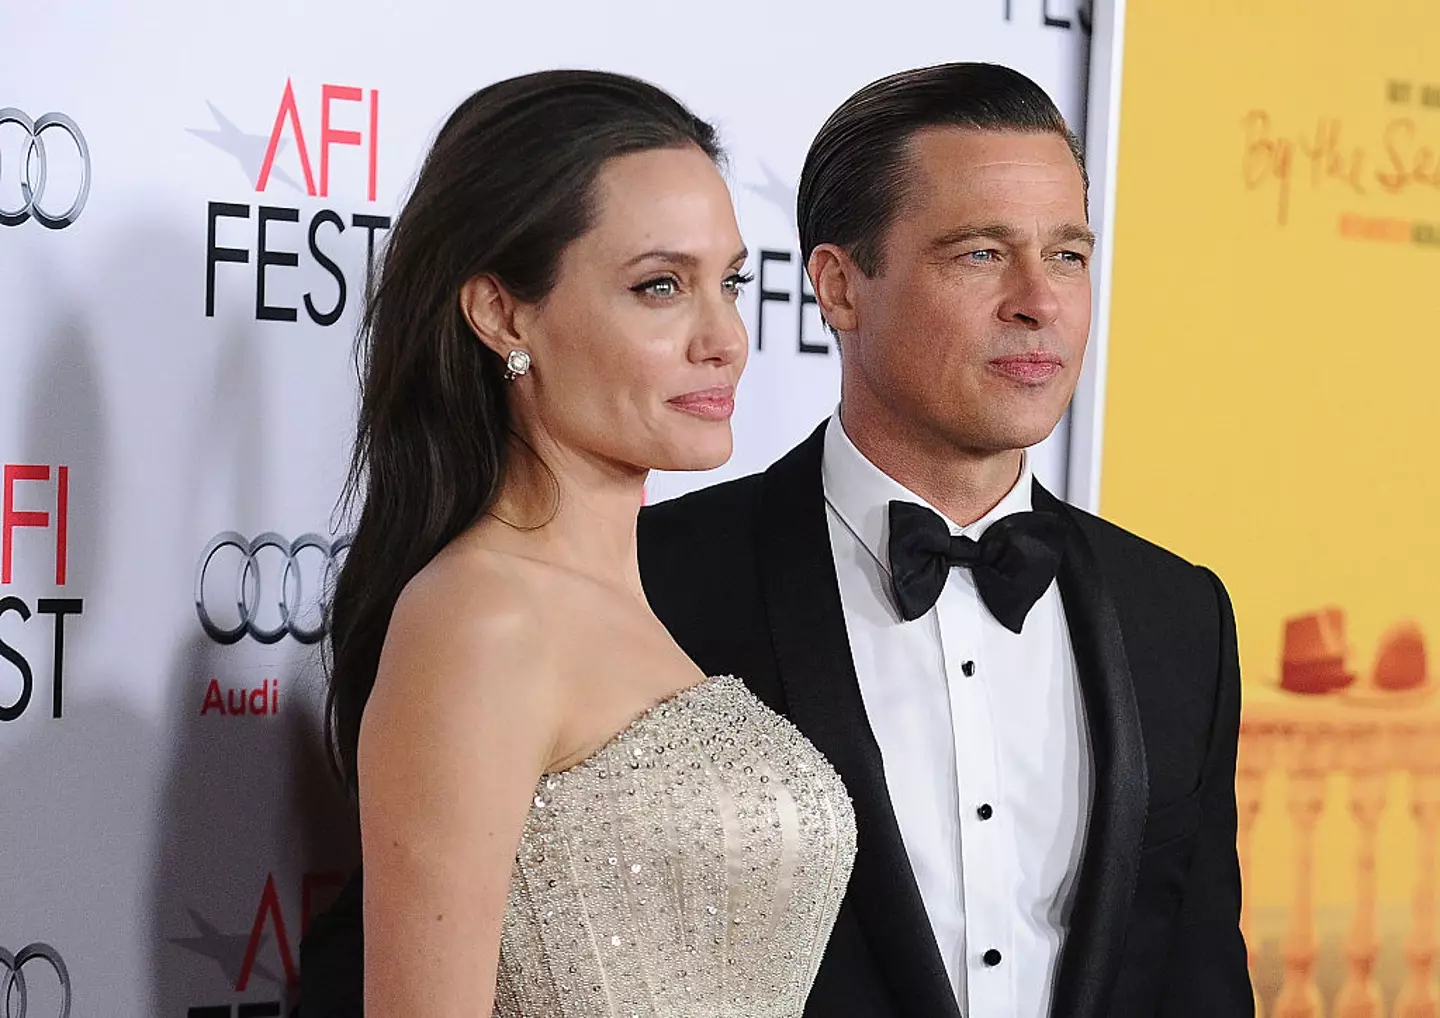 The couple were together for over 10 years. (Jason LaVeris/FilmMagic/Getty)